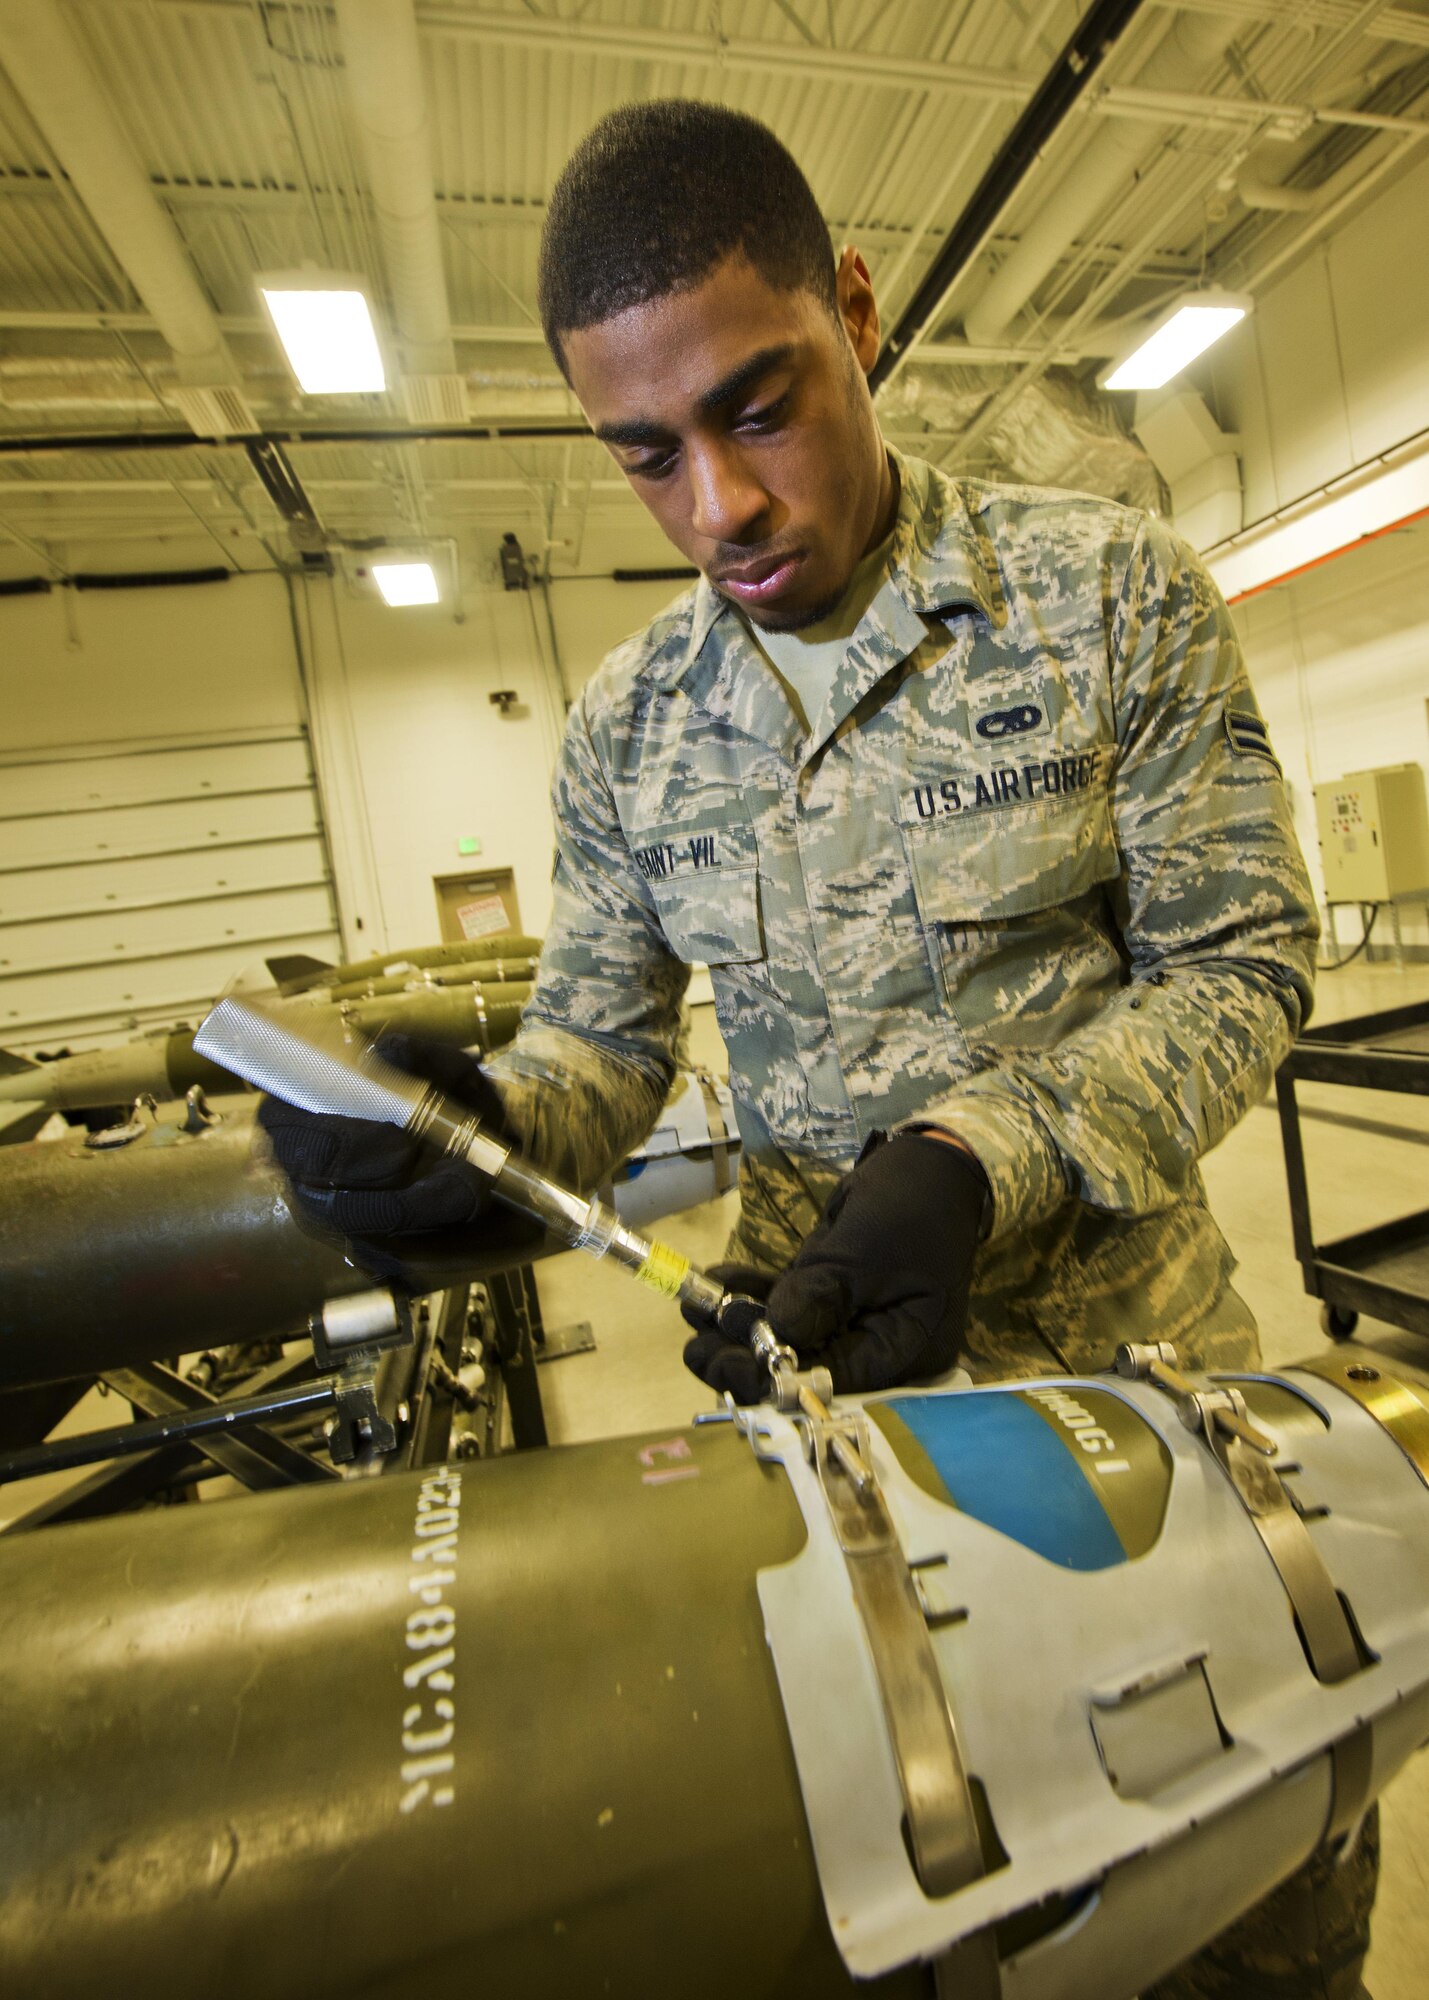 Airman 1st Class Ginseler Saint-Vil, 5th Munitions Squadron line delivery technician, tightens screws on a GBU-38 nose aero-surface assembly at Minot Air Force Base, N.D., Oct. 27, 2016. During bomb building, set screws are tightened to secure the nose aero-surface assembly on an inert 500 lb. MK82 bomb. (U.S. Air Force photo/Airman 1st Class J.T. Armstrong)